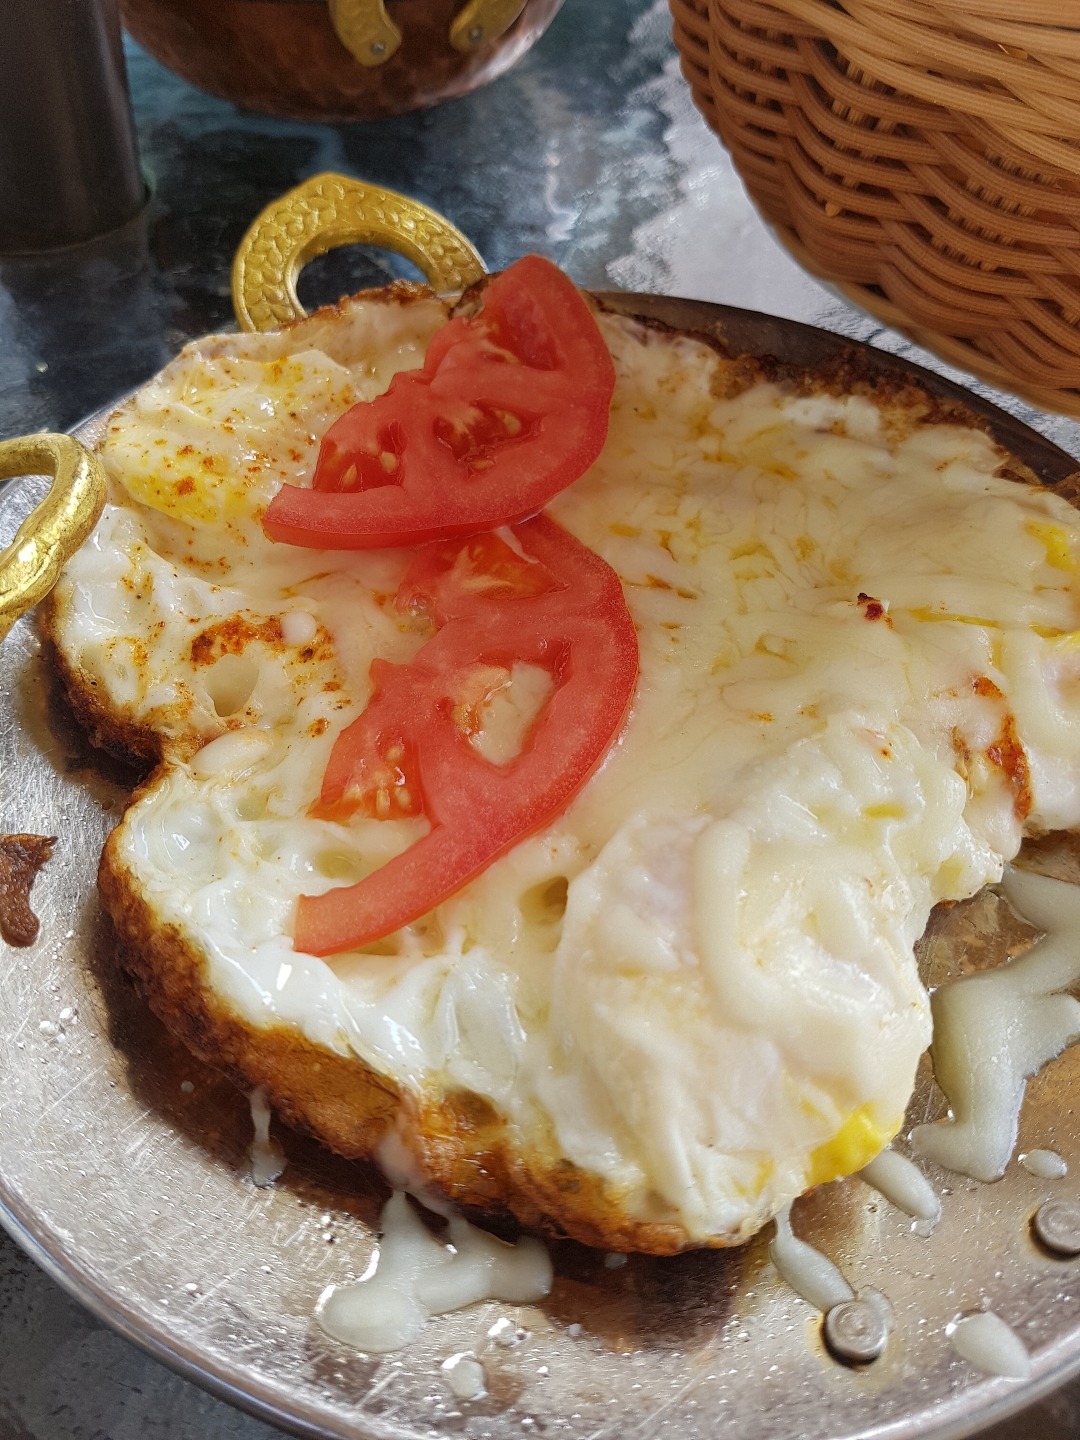 sunny side up egg with cheese @ Al Ameer Restaurant - Bahrain